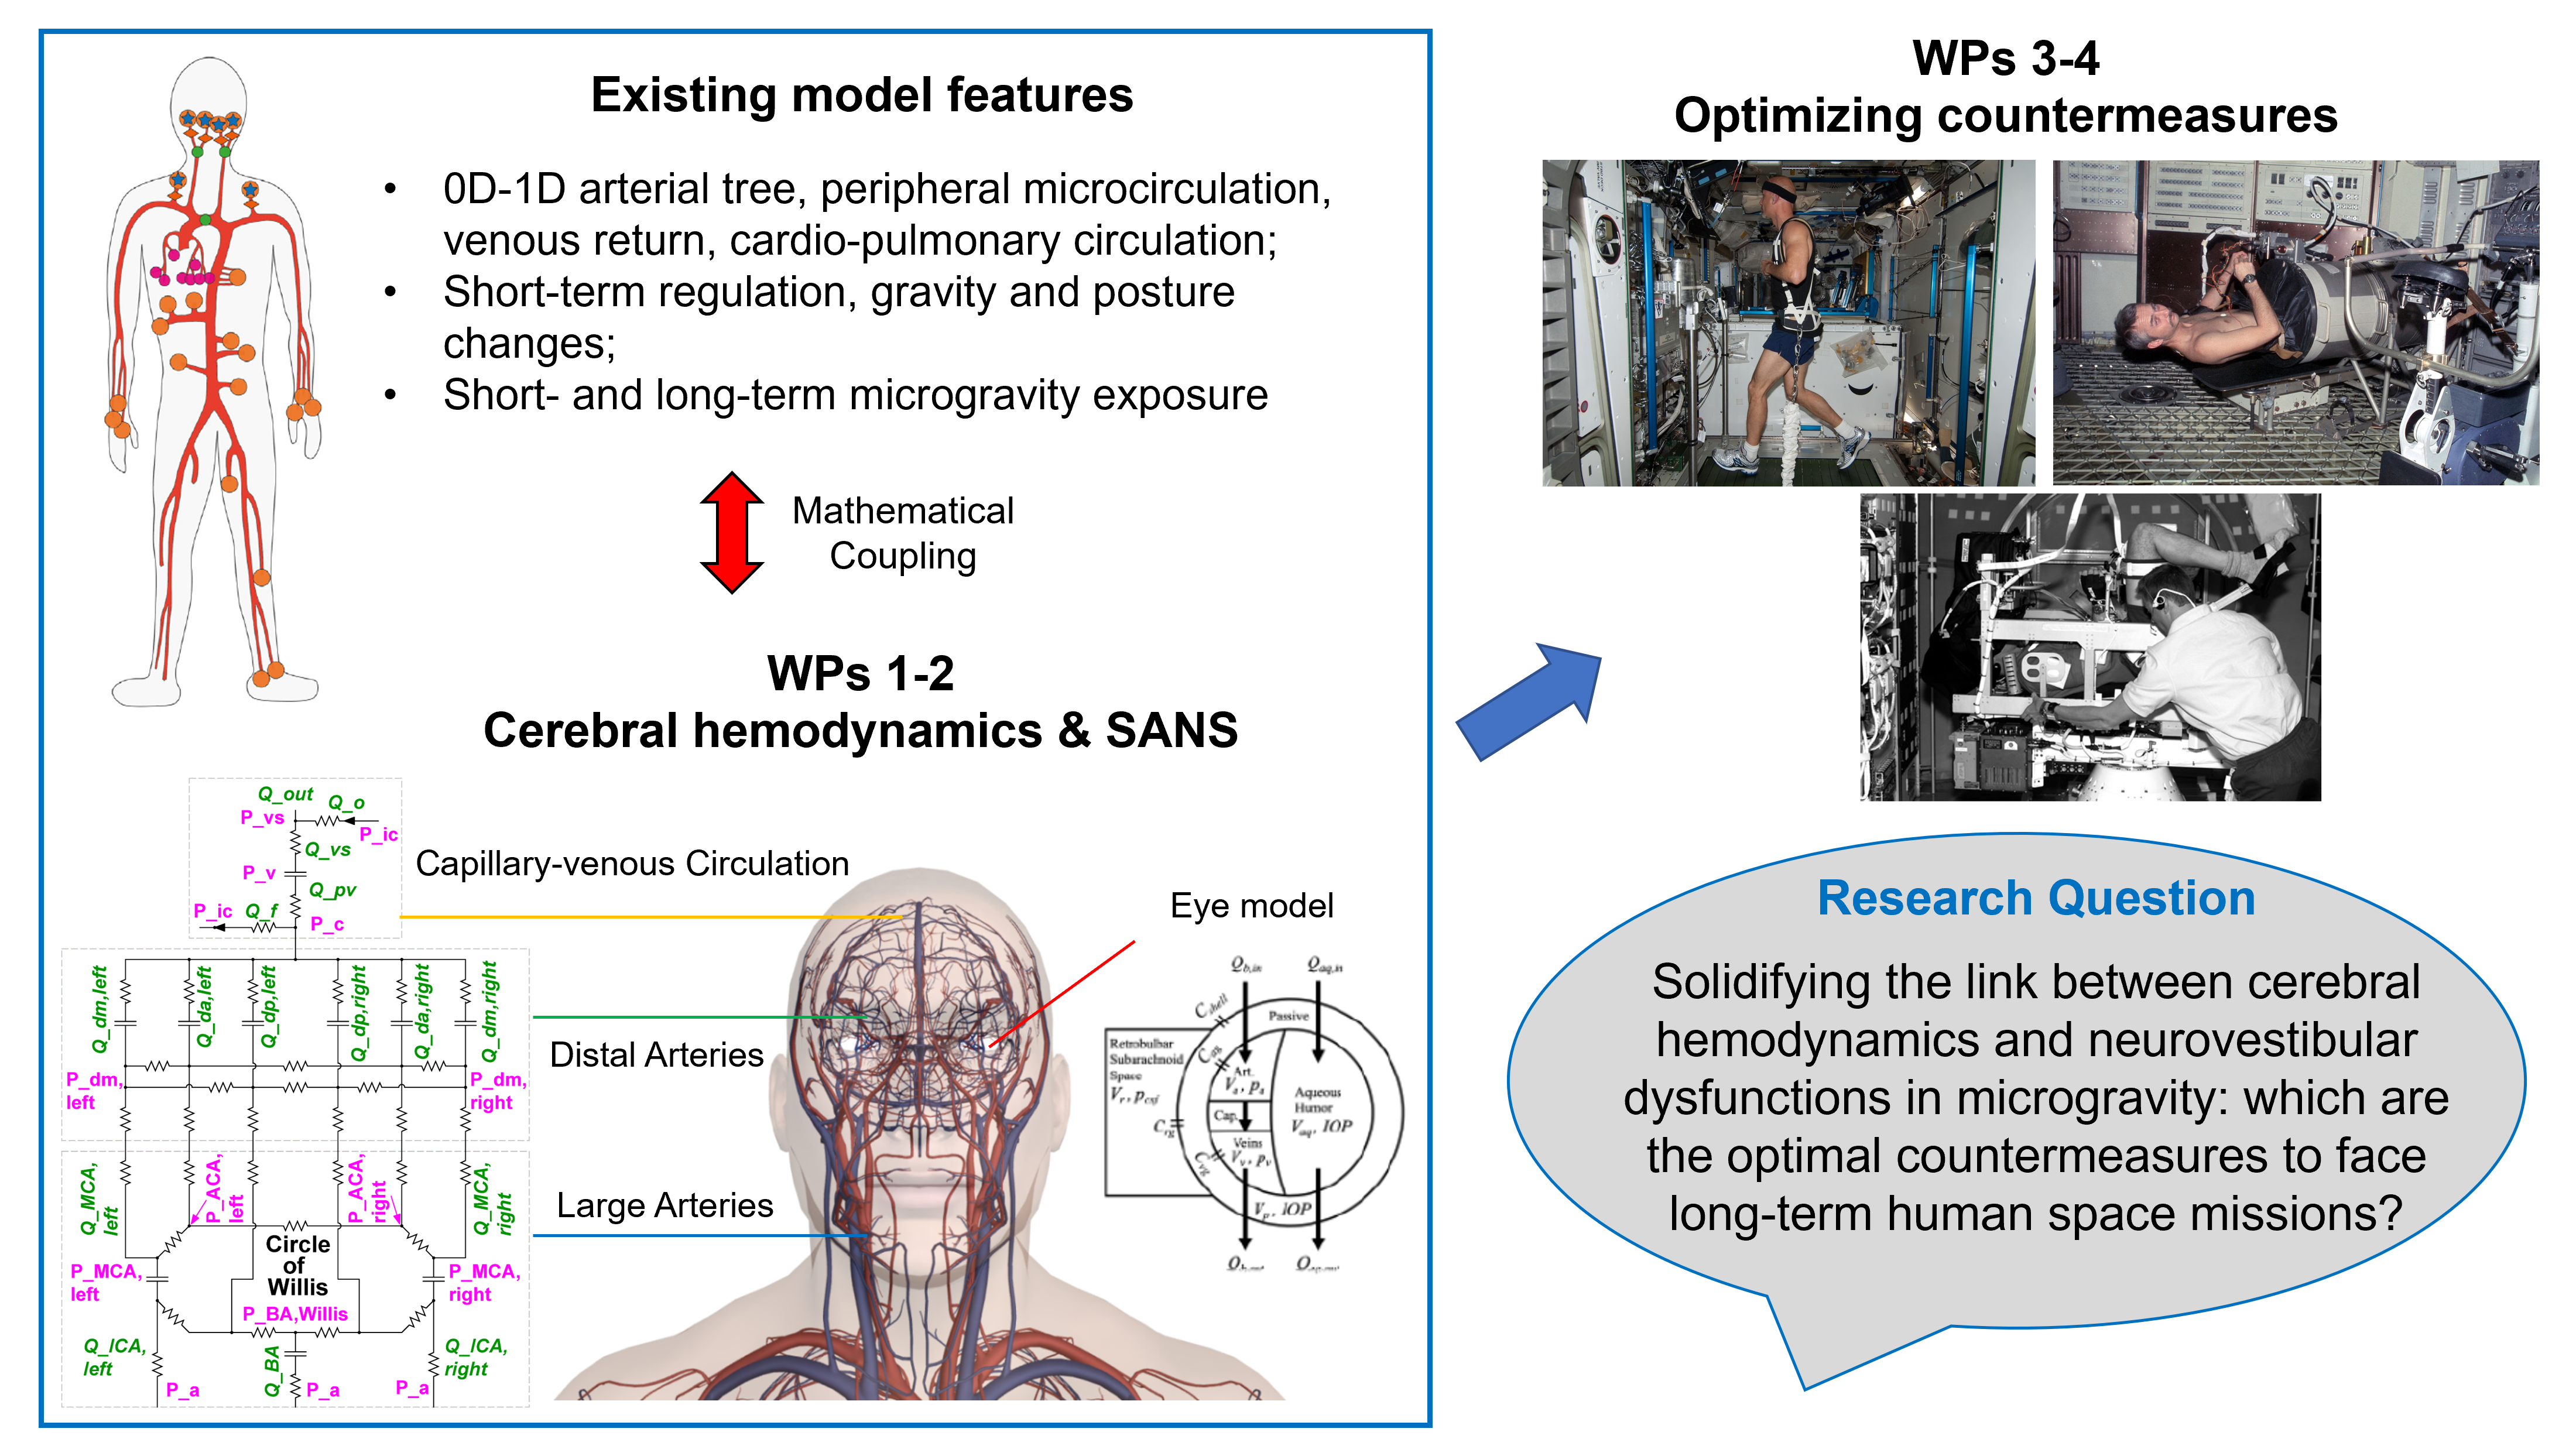 Optimizing countermeasures against cardiovascular deconditioning and cerebral hemodynamics changes in long-term human spaceflights